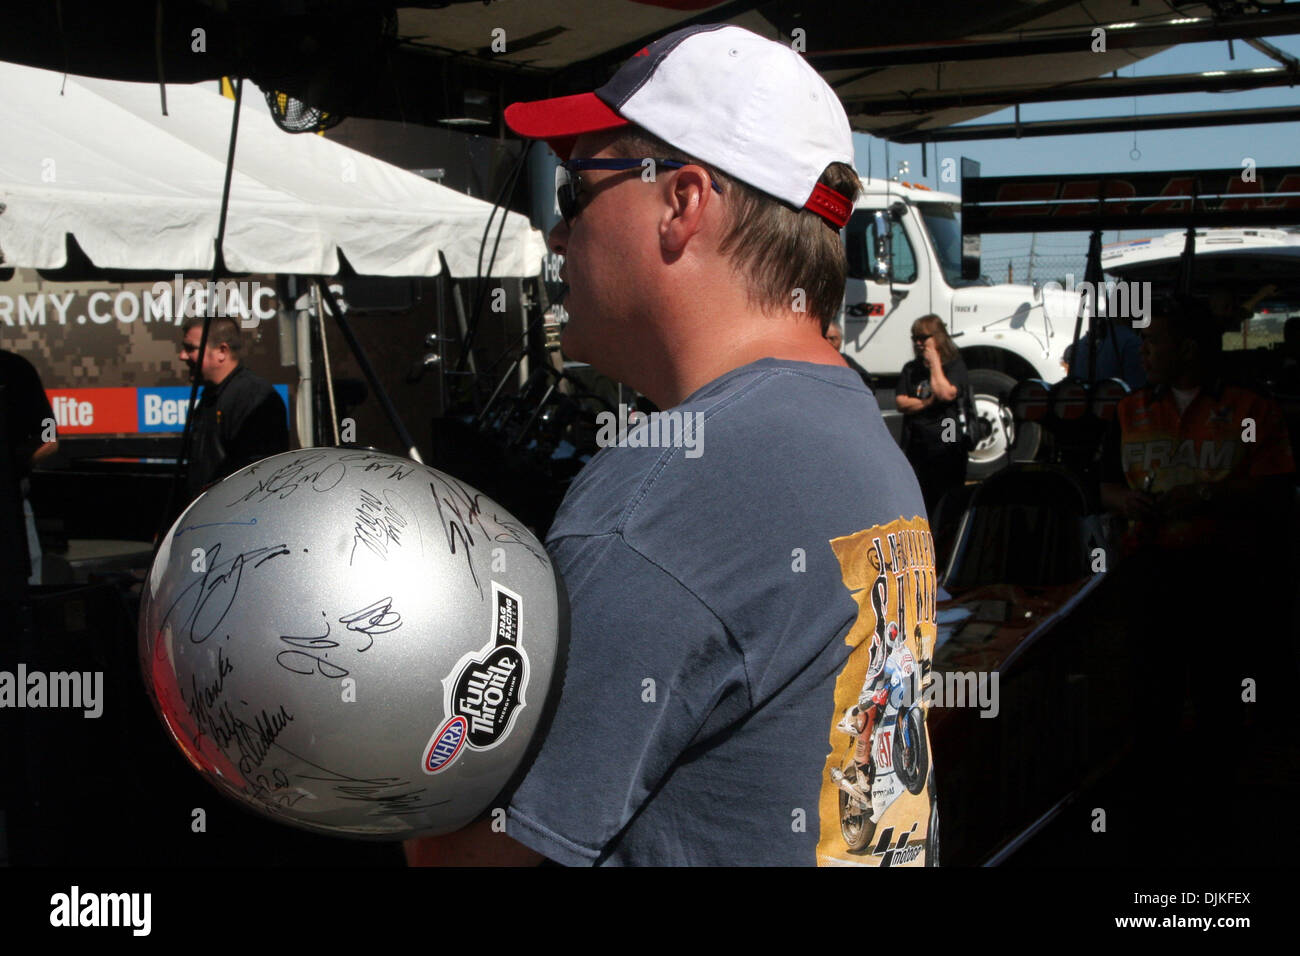 Sep. 05, 2010 - Indianapolis, Indiana, United States of America - 05 September 2010: A fan holds a helmet covered with autographs. The Mac Tools U.S. Nationals were held at O'Reilly Raceway Park in Indianapolis, Indiana. (Credit Image: © Alan Ashley/Southcreek Global/ZUMApress.com) Stock Photo